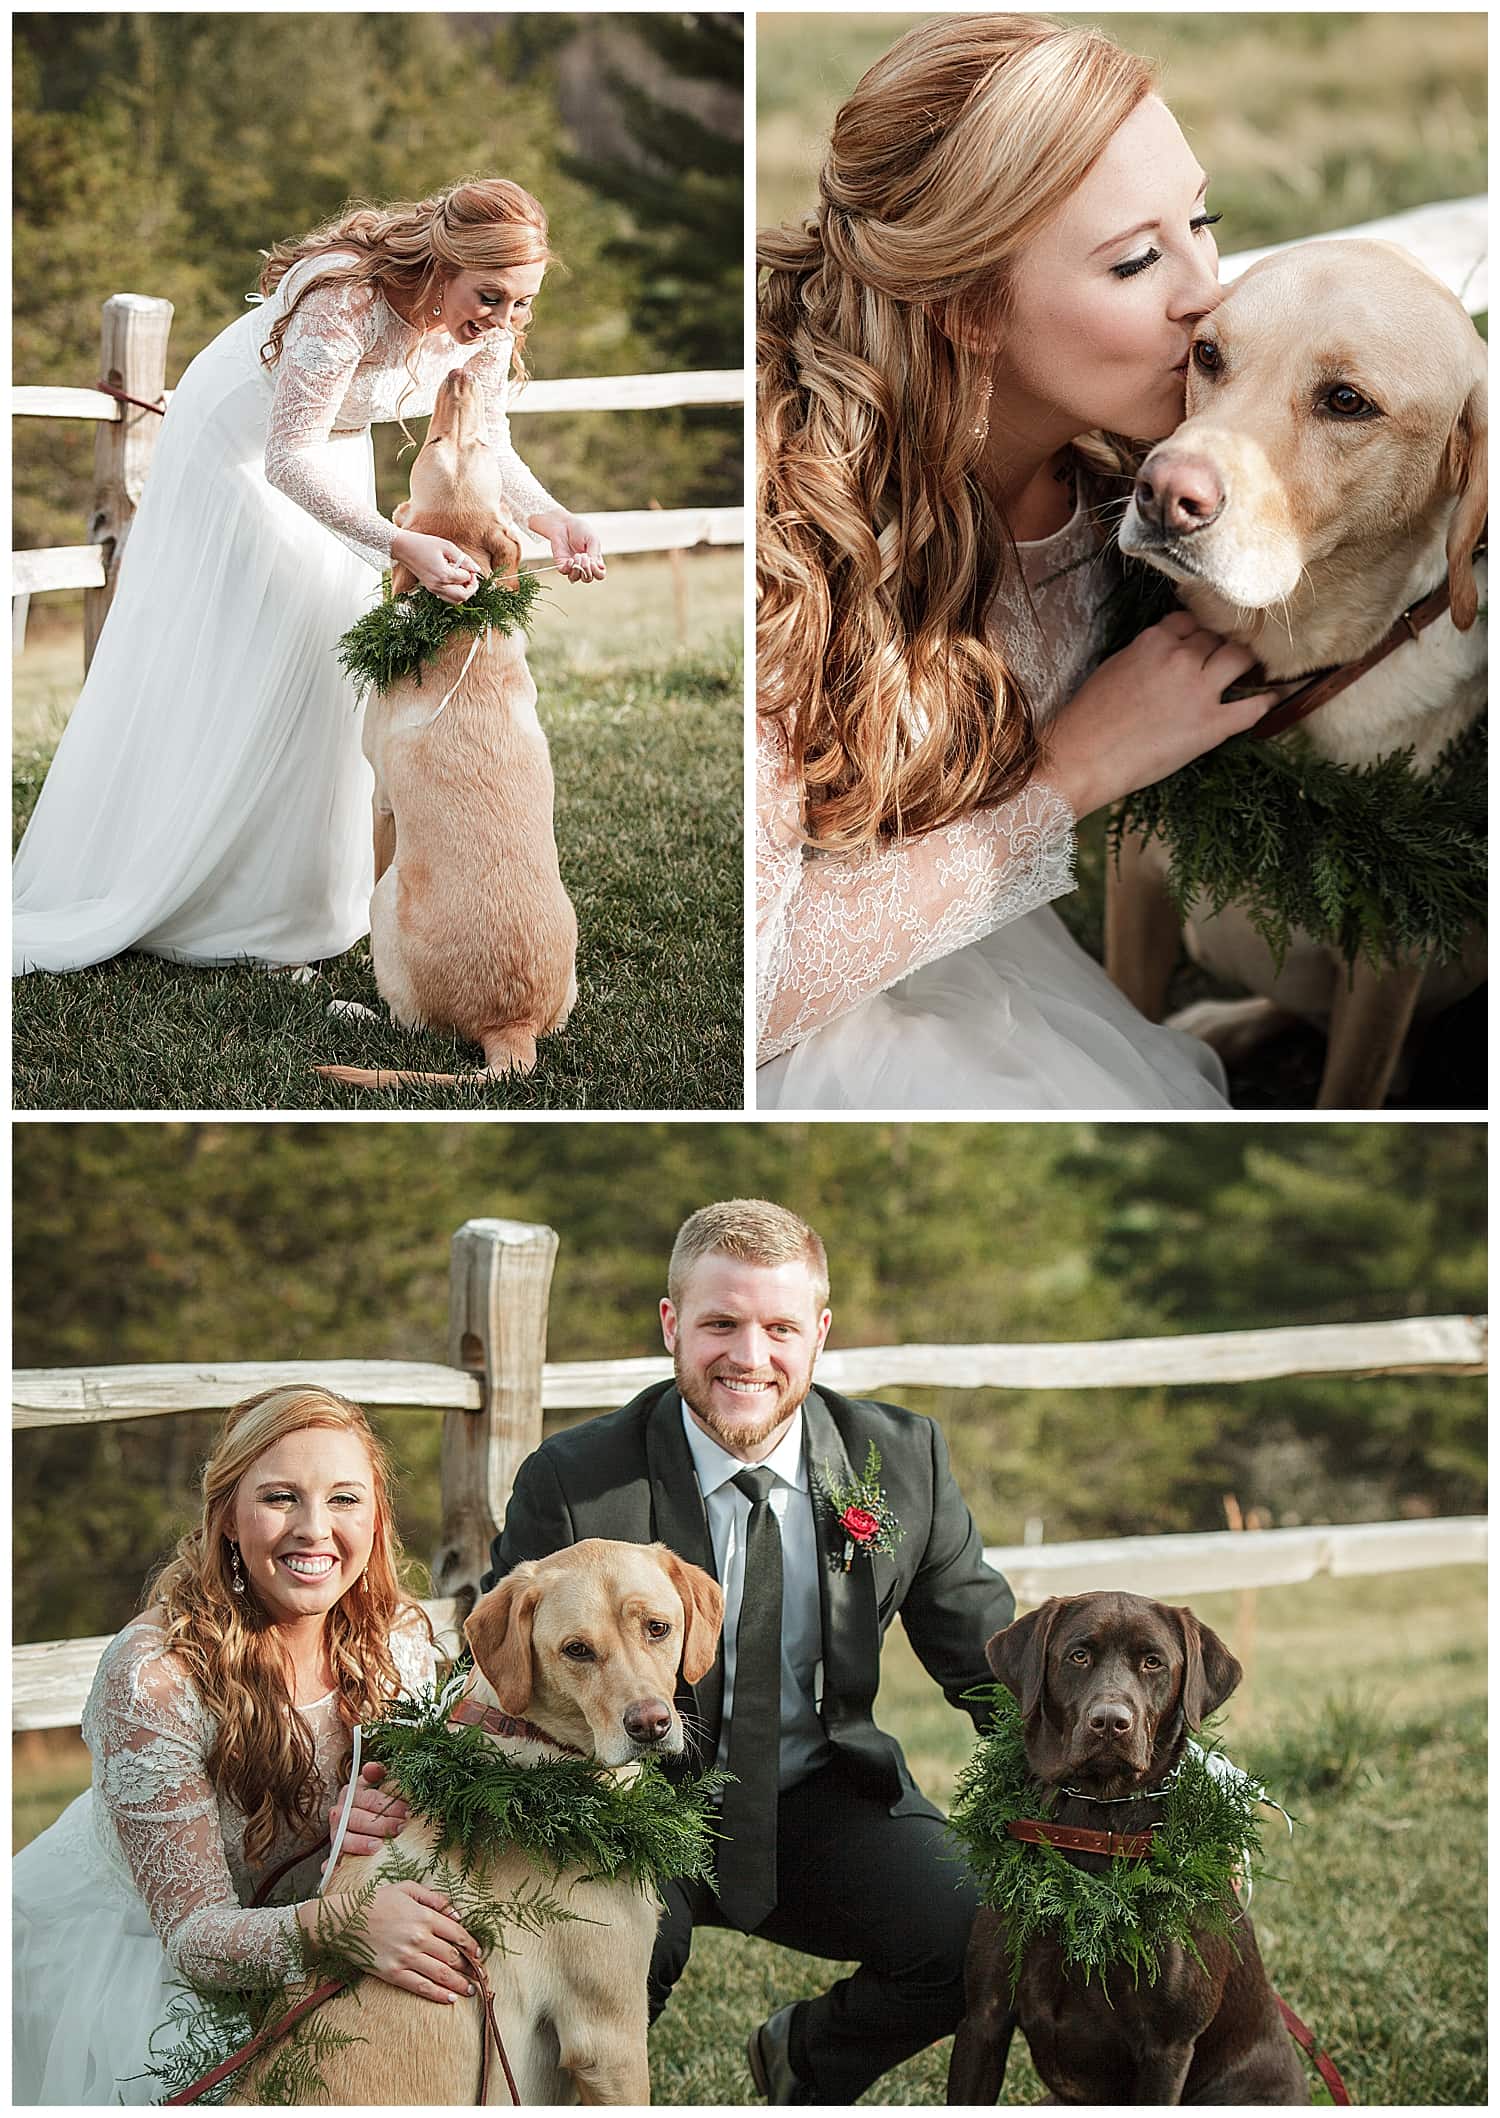 Photo collage of bride and groom posing with their yellow lab and chocolate lab dogs on their wedding day